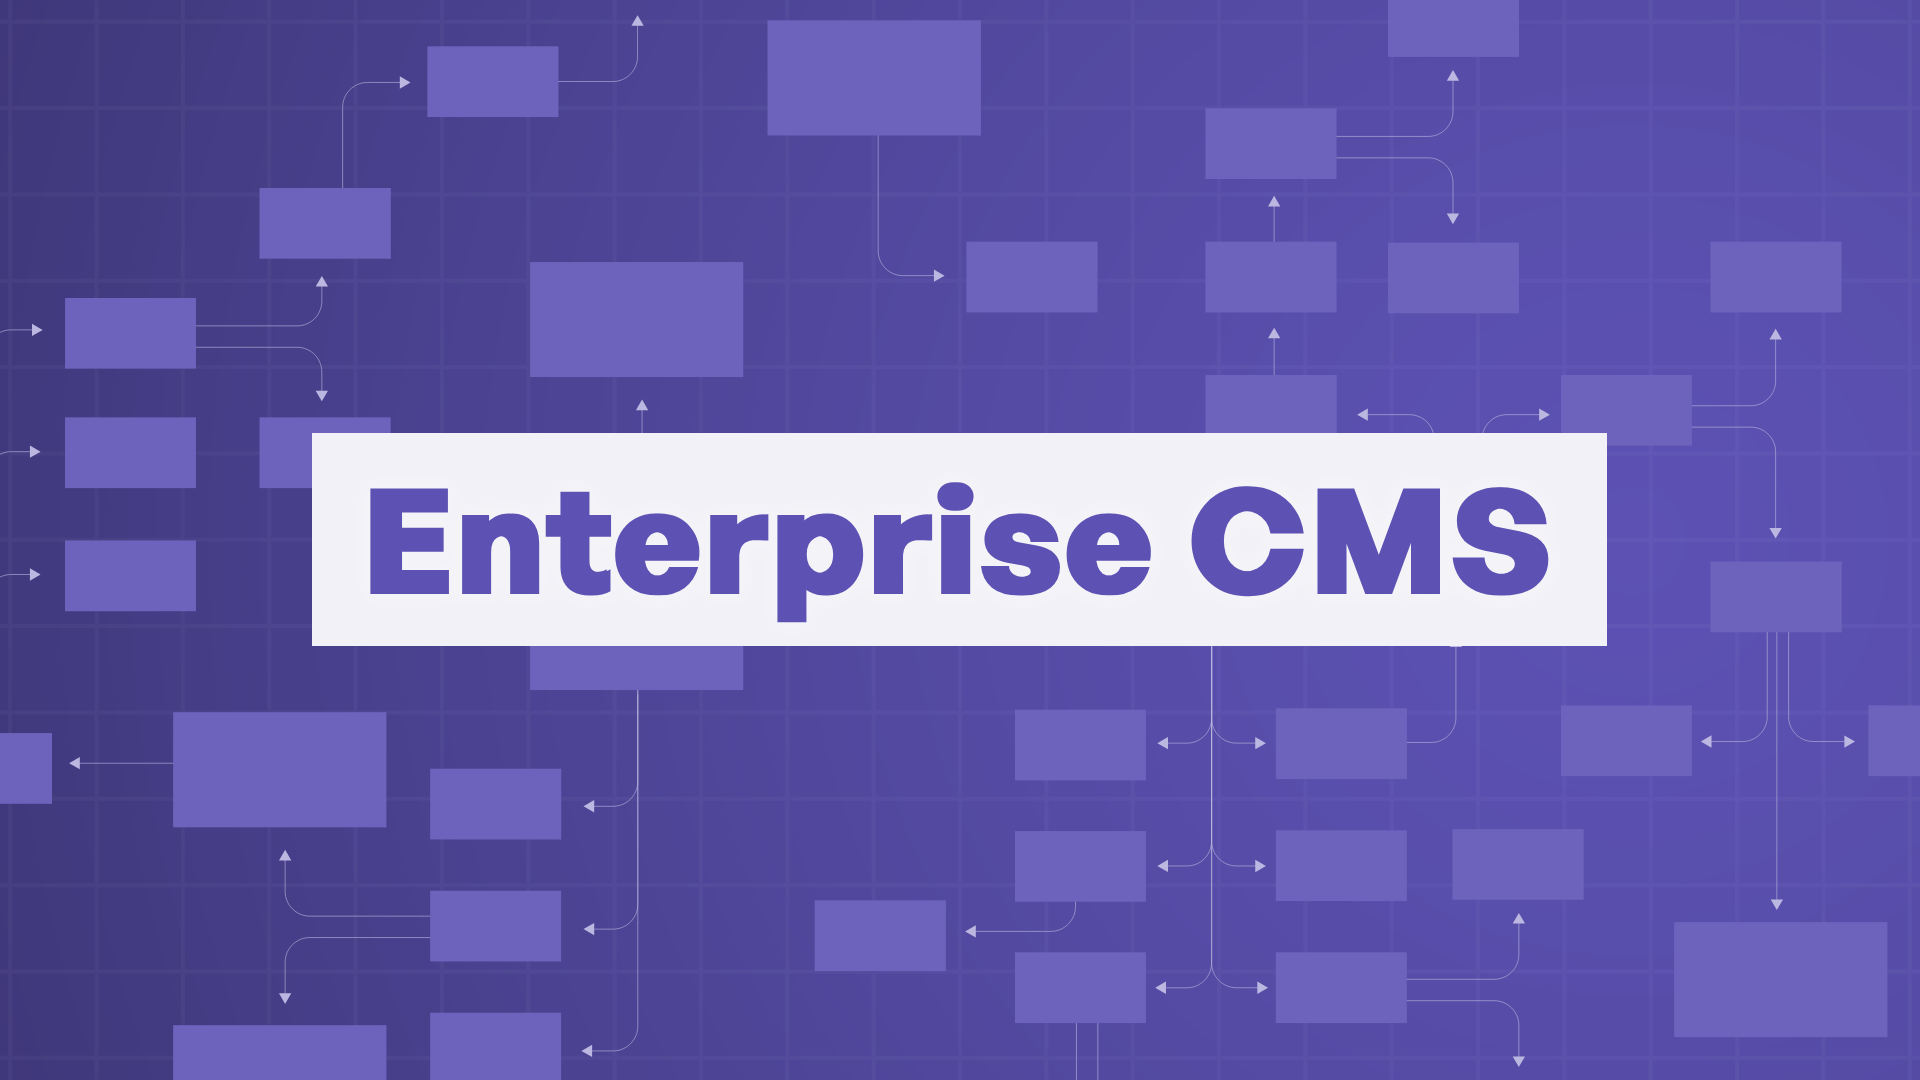 "Enterprise CMS" with collections pointing to each other as references